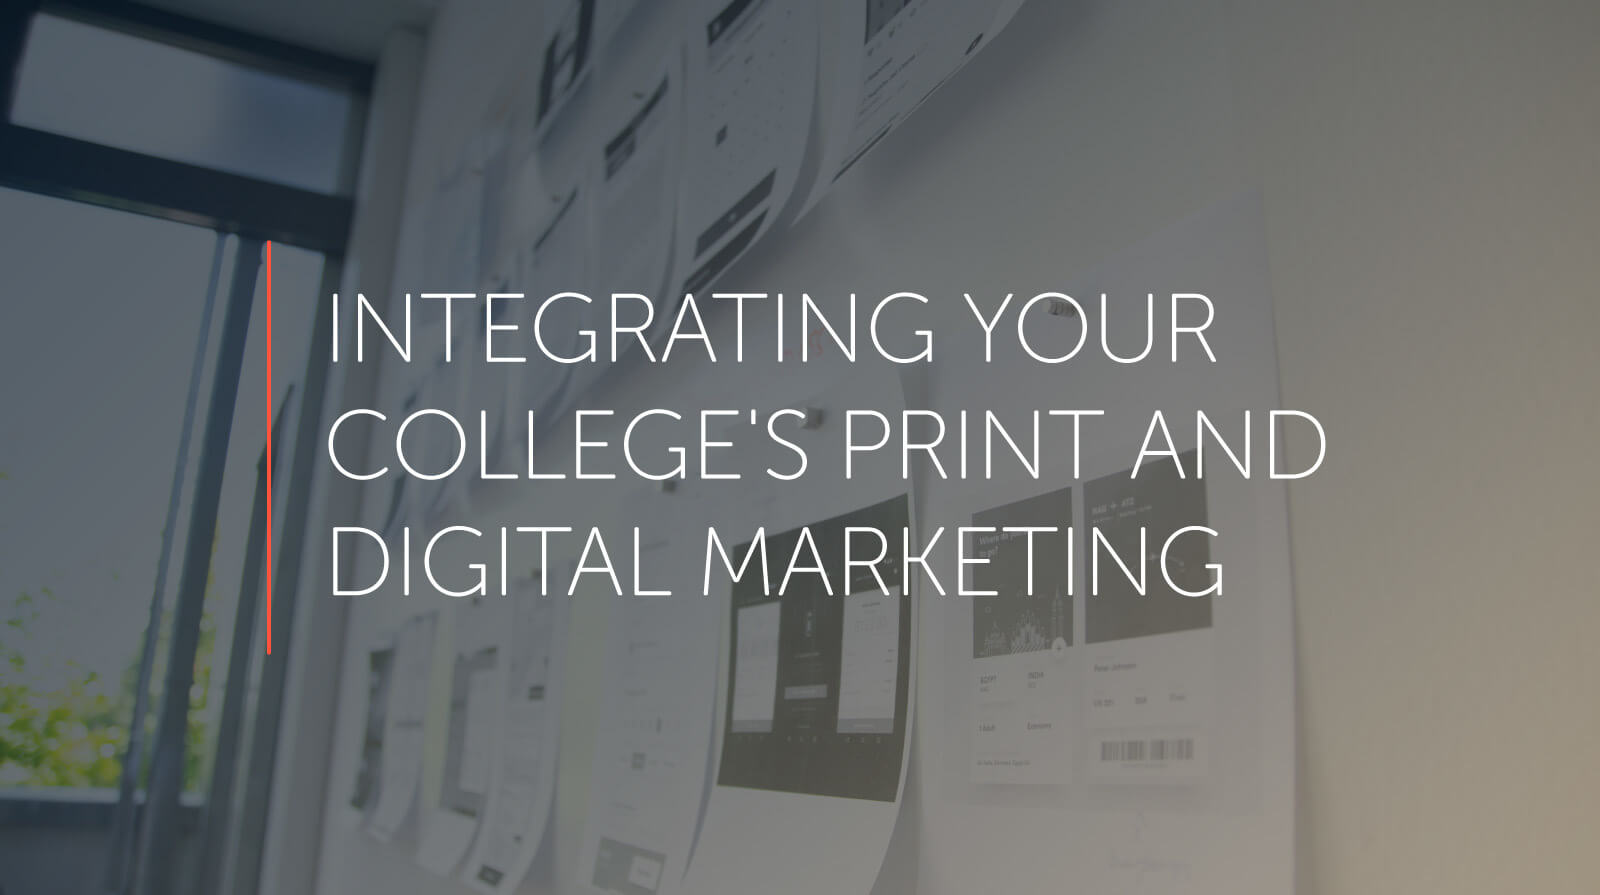 Picture of an idea board with papers hung up overlaid with the words integrating your college's print and digital marketing